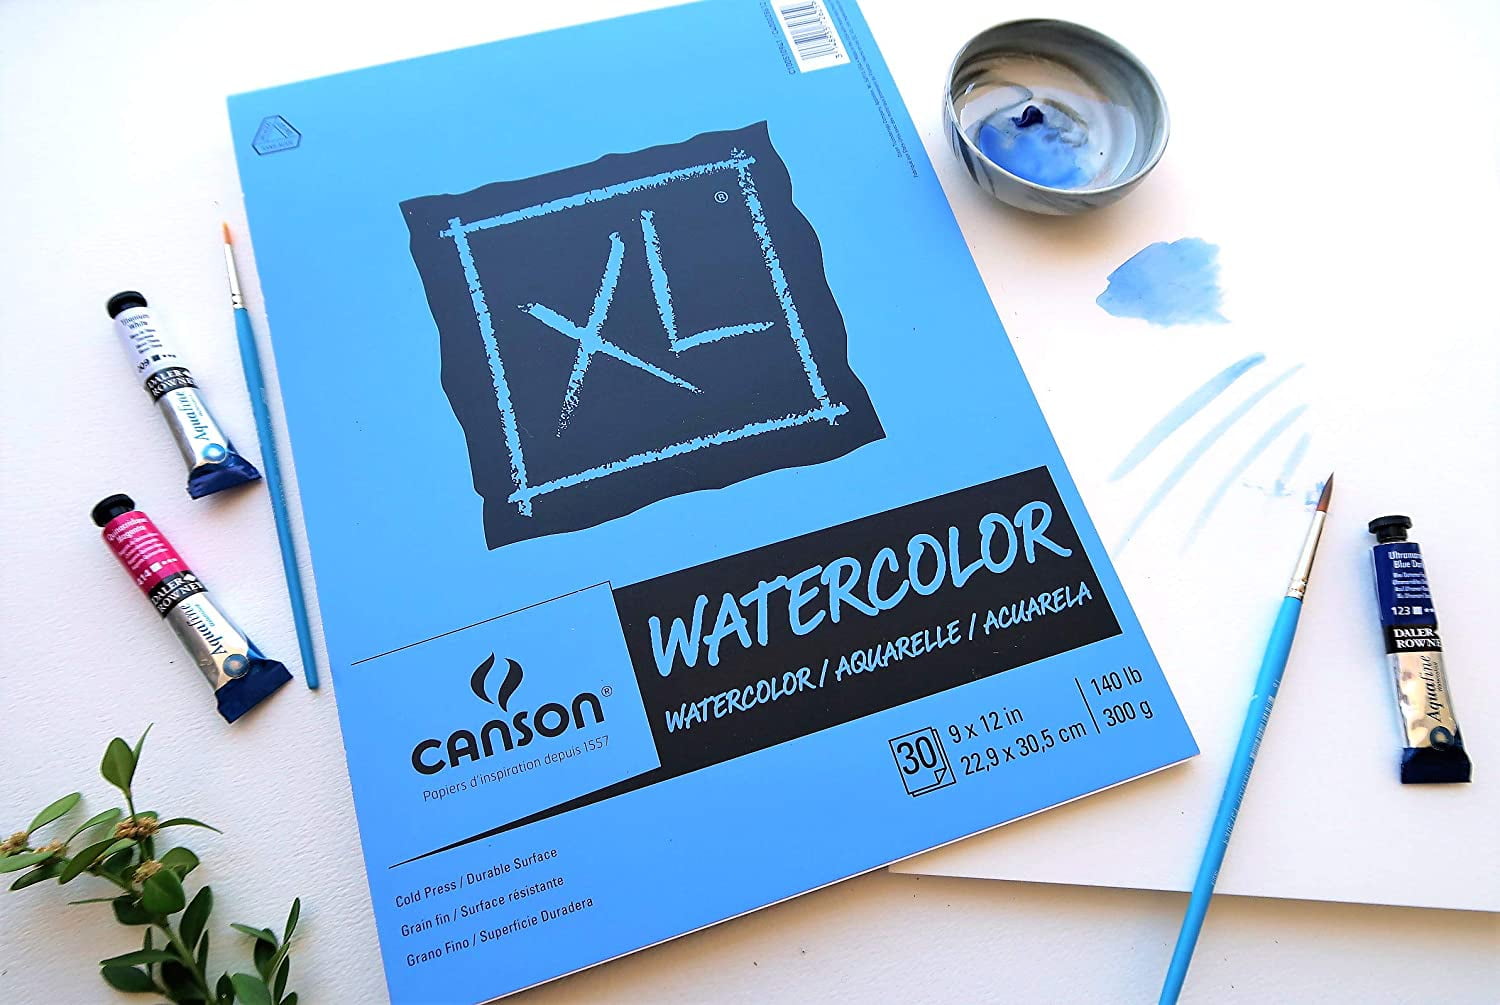 Canson XL Watercolor Sketch Pad, 9 x 12 Painting Paper Fold Over  Sketchbook, 30 Sheets